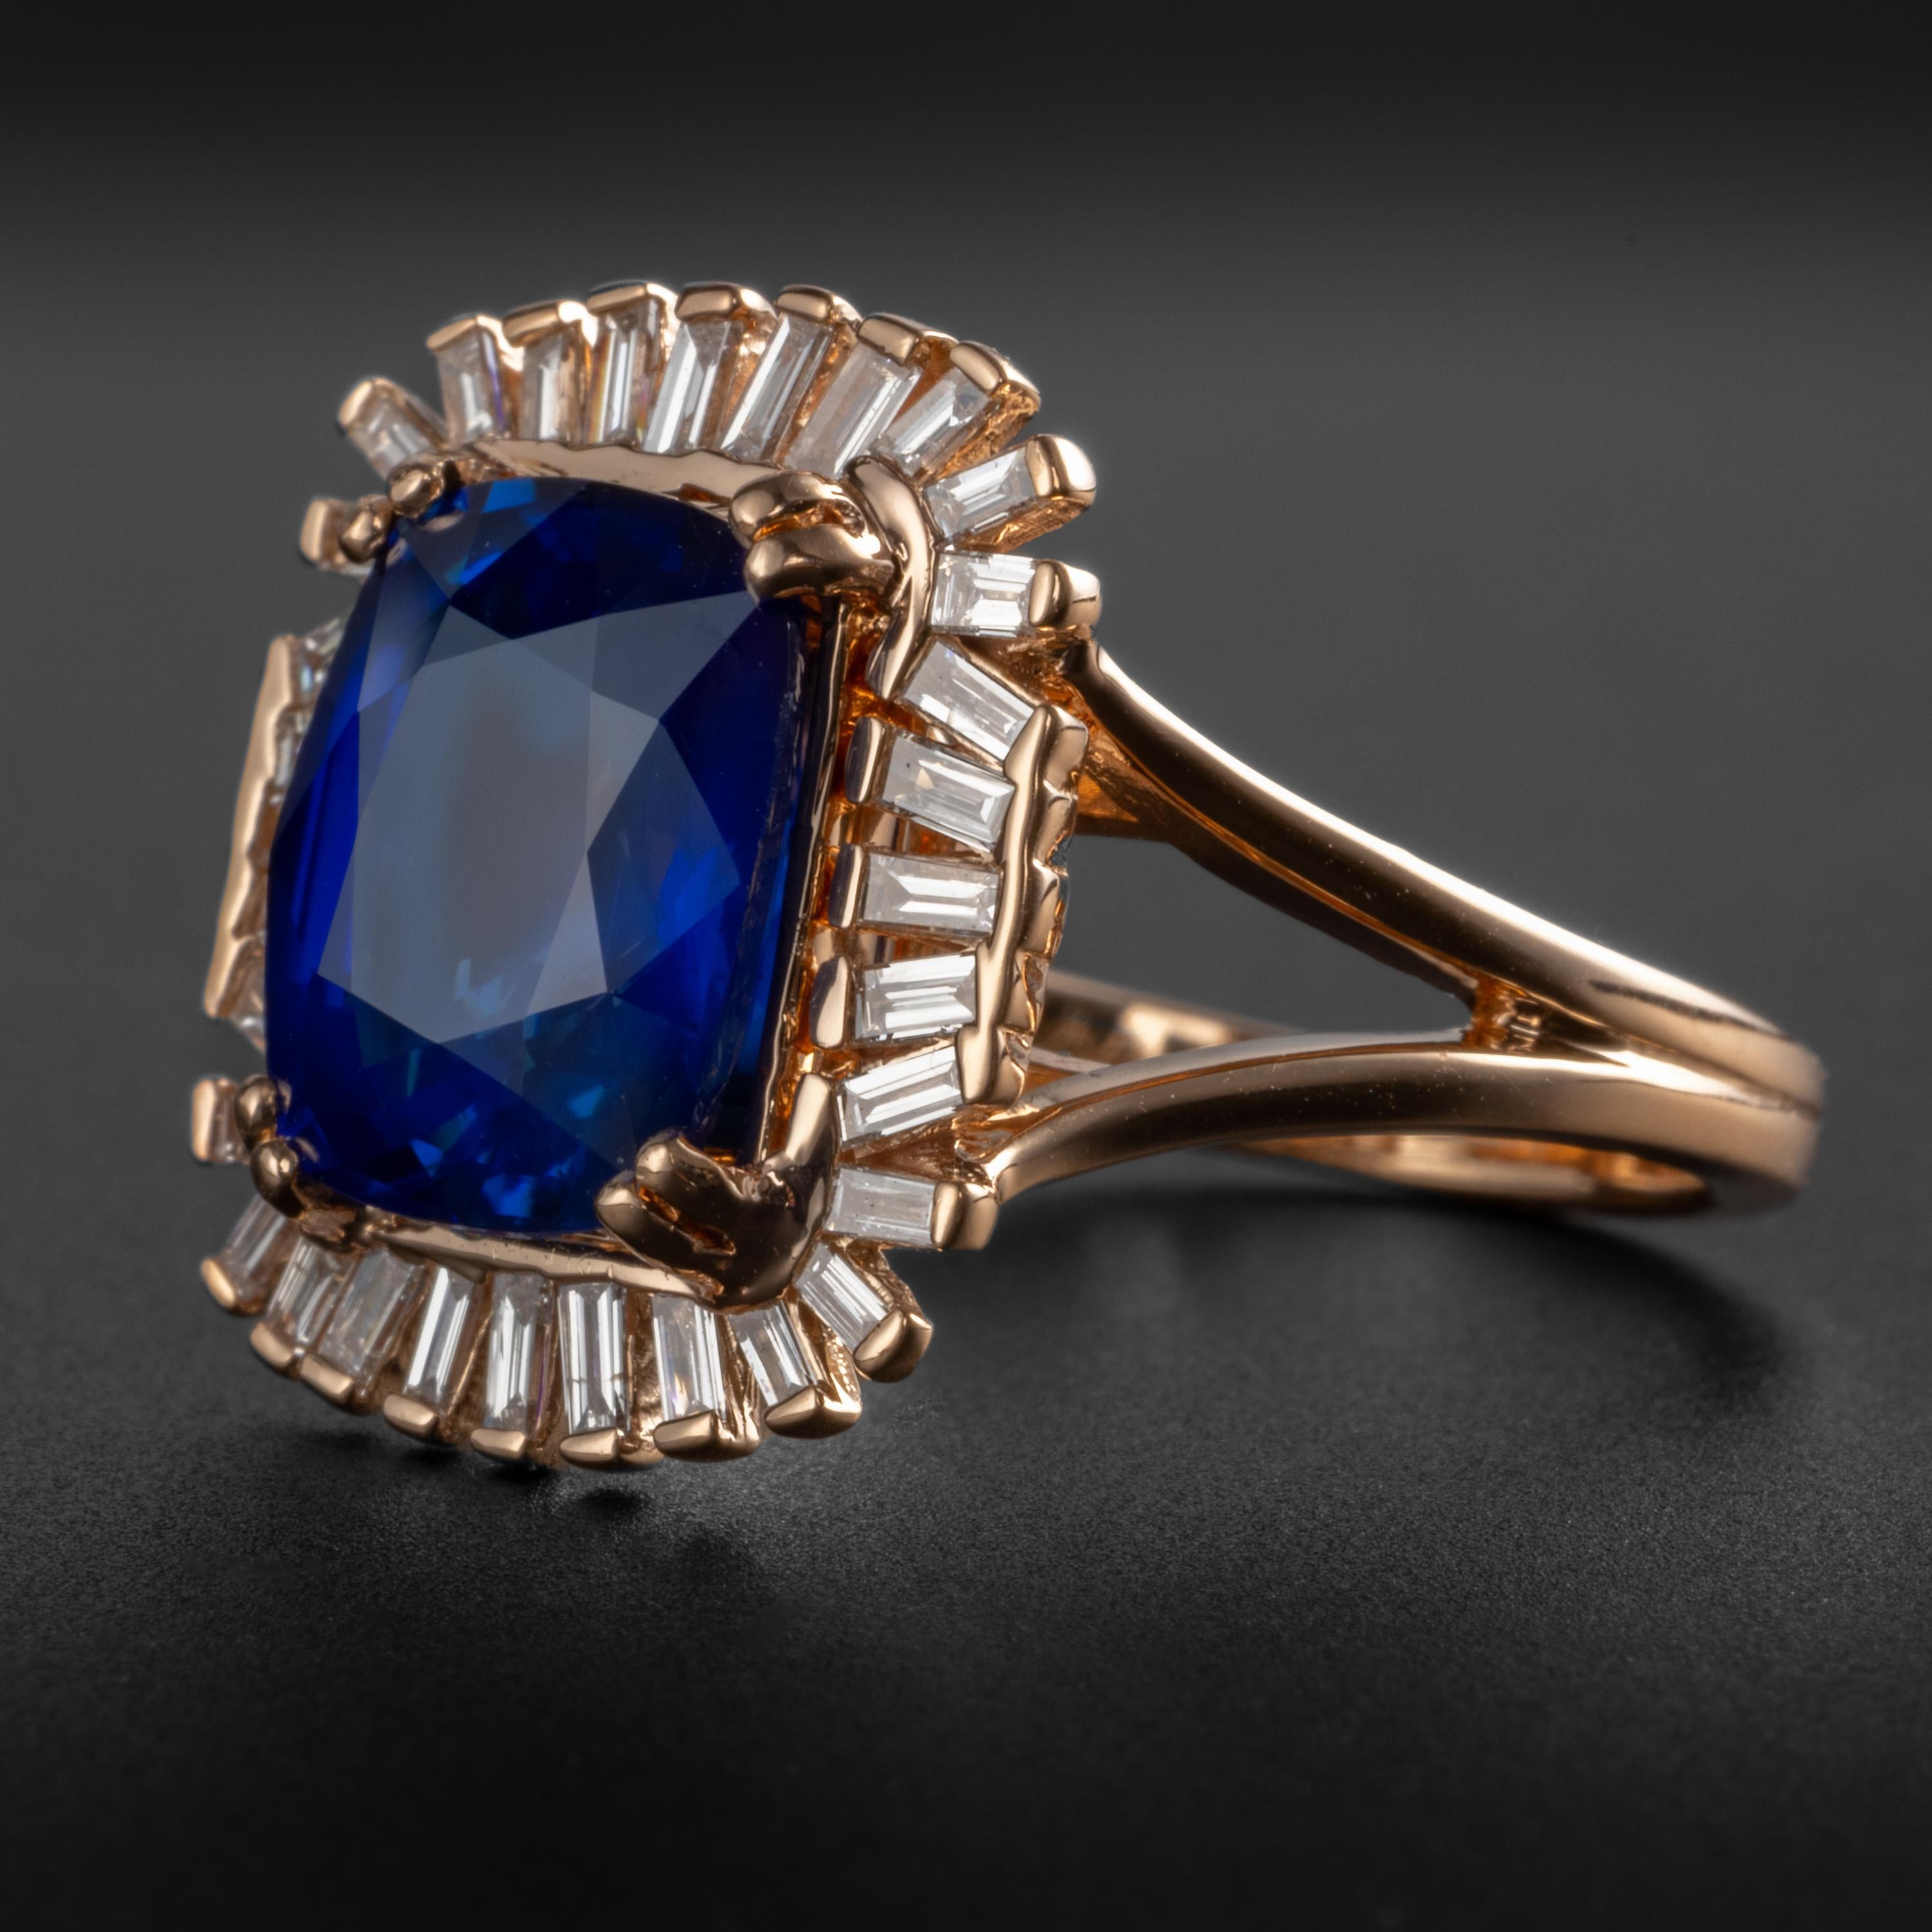 A mixed cut cushion-shaped 4.04 unheated royal blue sapphire from Madagascar is the center of attention in this glamorous rose gold cocktail ring. The sapphire is surrounded by a fan of 32 tapered baguette diamonds weighing a total of .50 carats.